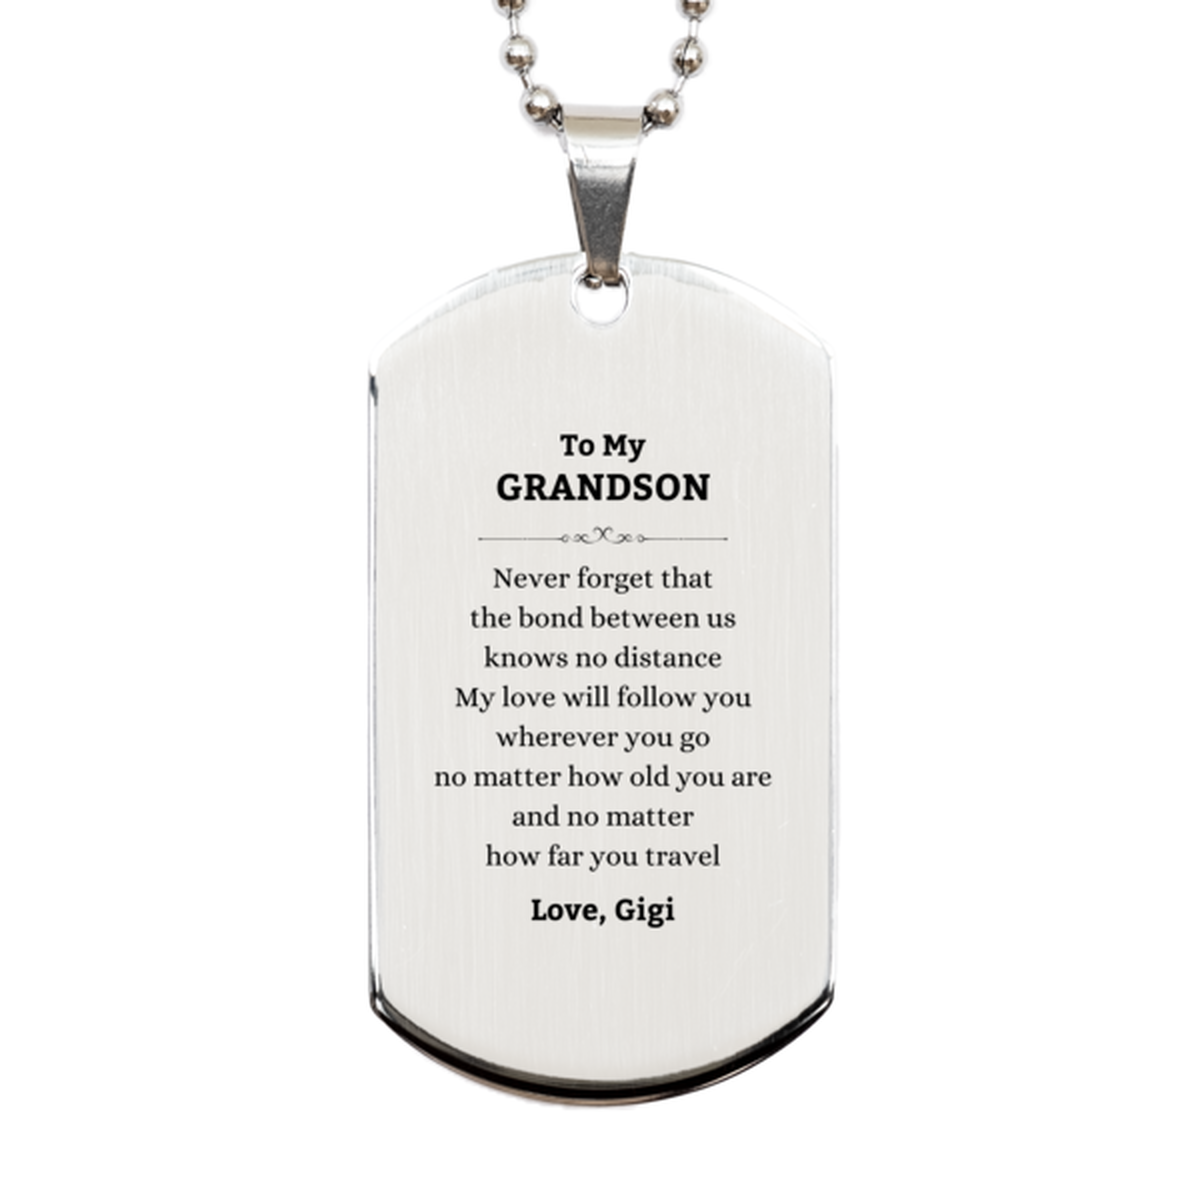 Grandson Birthday Gifts from Gigi, Adjustable Silver Dog Tag for Grandson Christmas Graduation Unique Gifts Grandson Never forget that the bond between us knows no distance. Love, Gigi